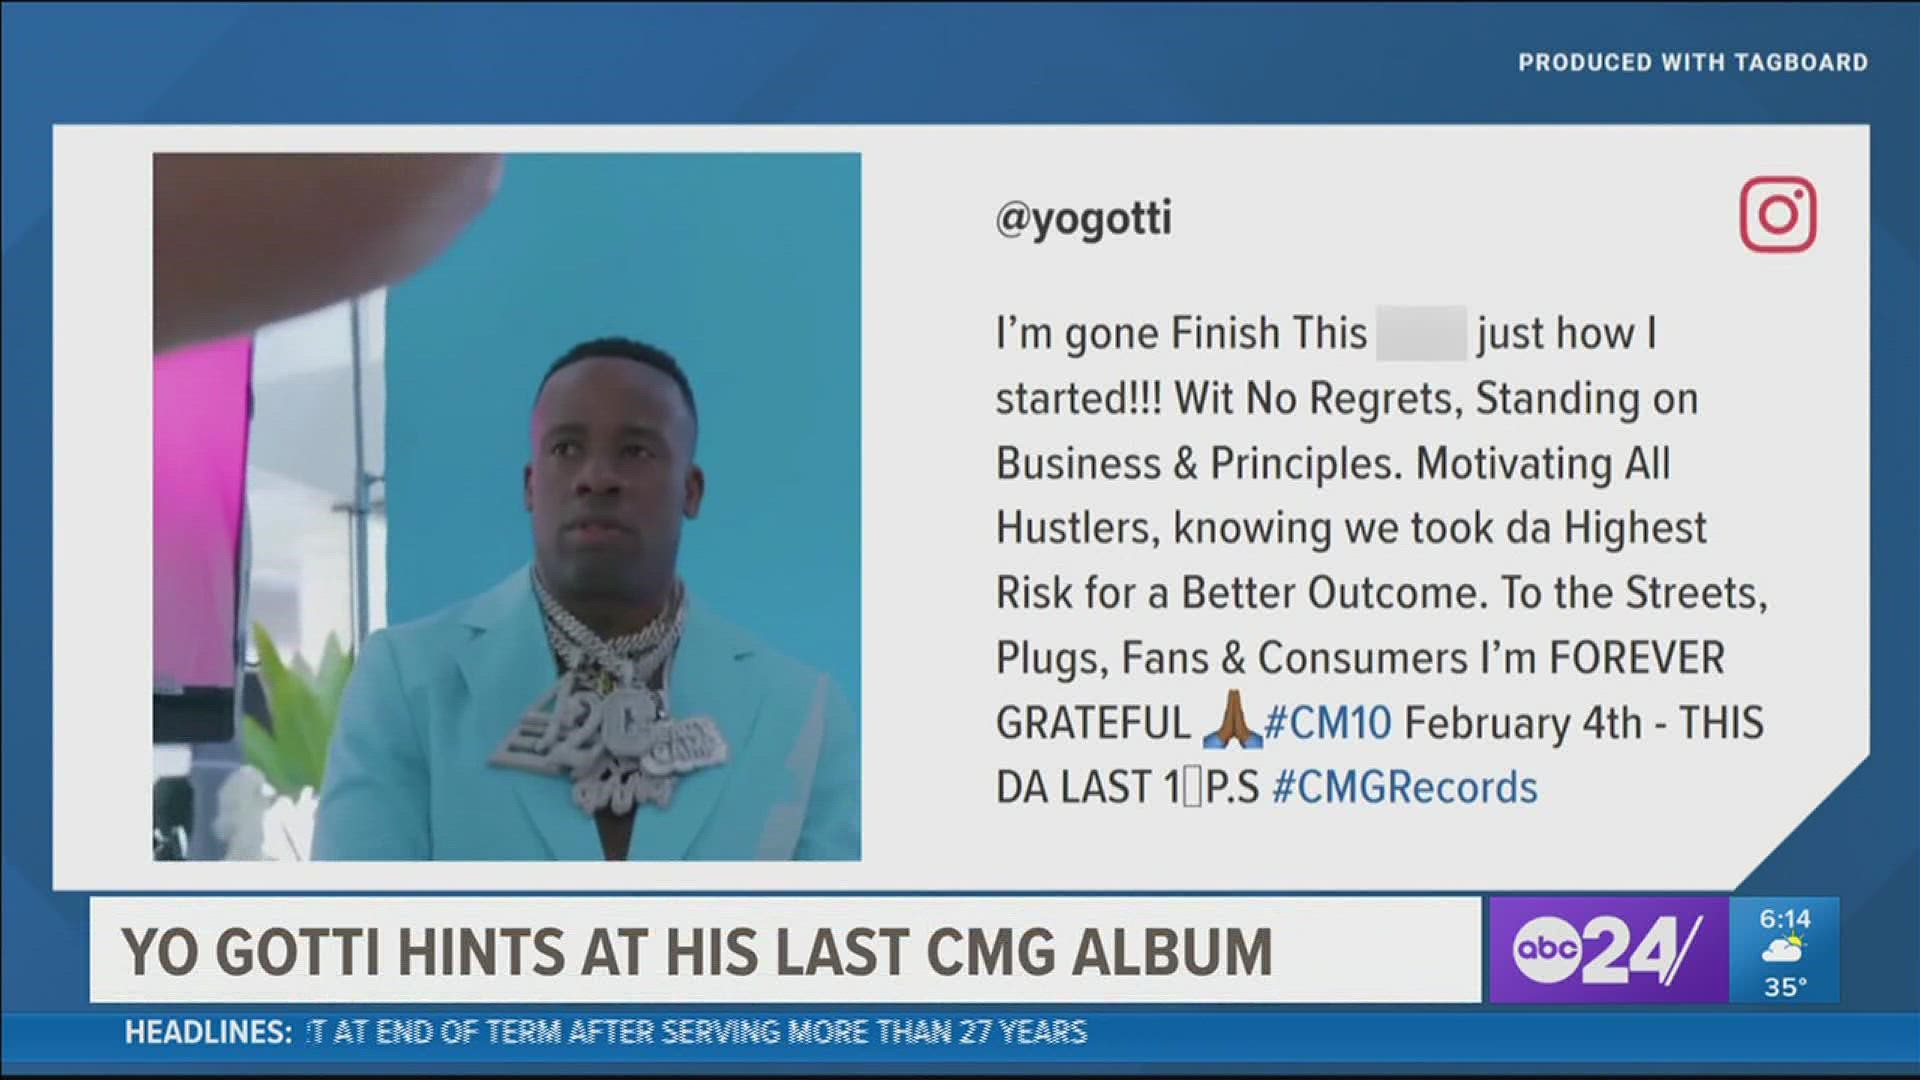 As the head of the CMG label, Gotti is grabbing attention because this may be his last album.